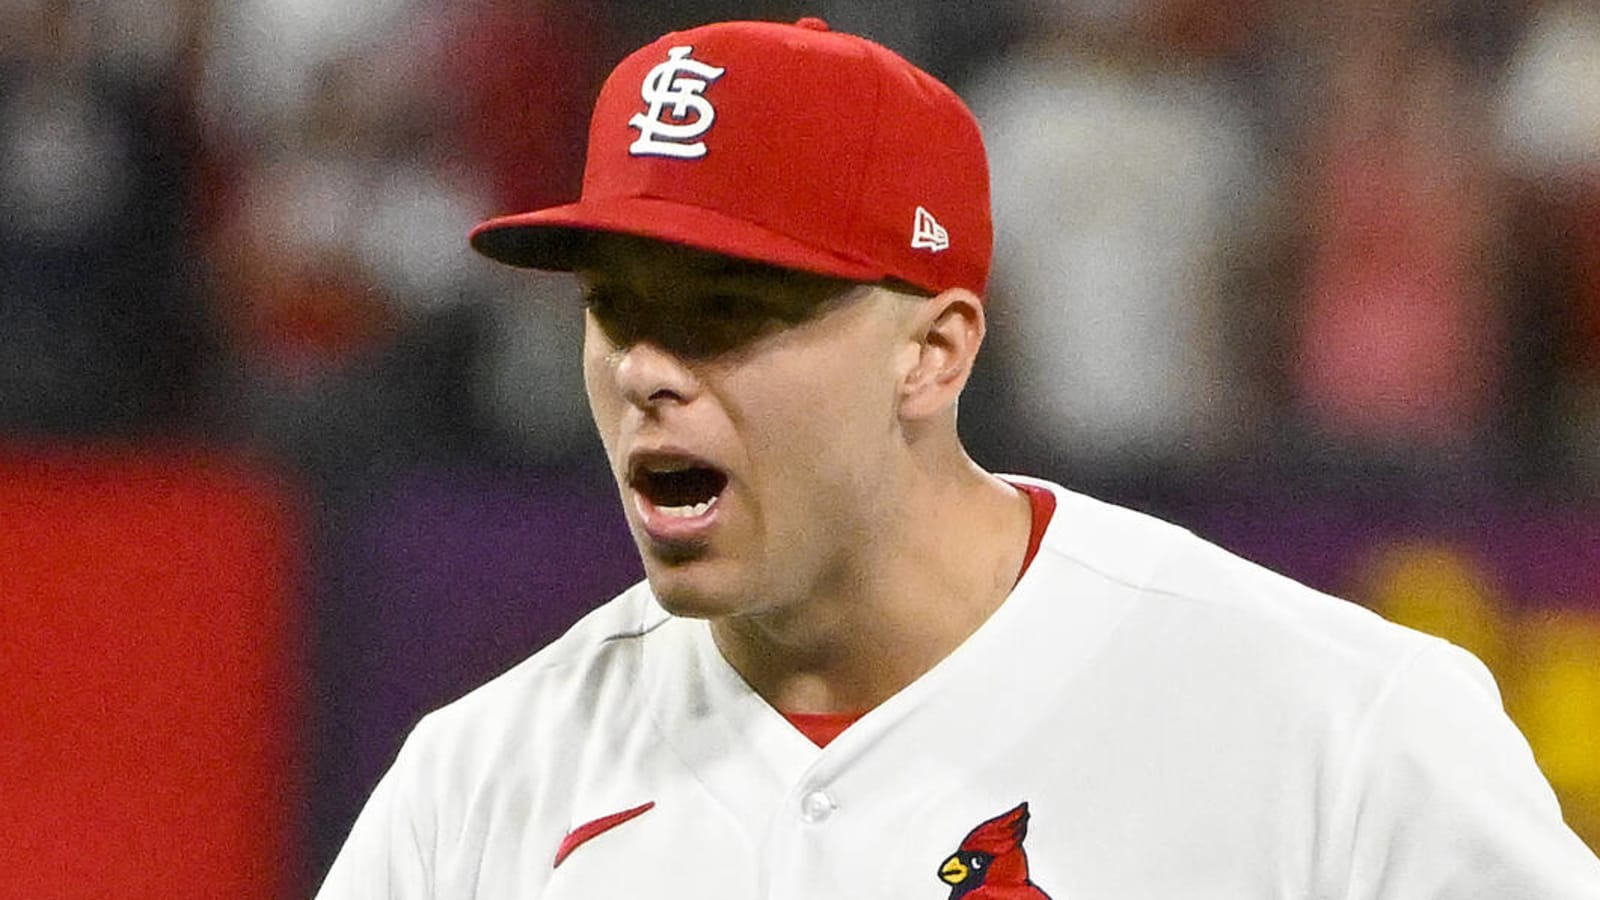 Cardinals reportedly discussed long-term deal with Ryan Helsley before arbitration hearing